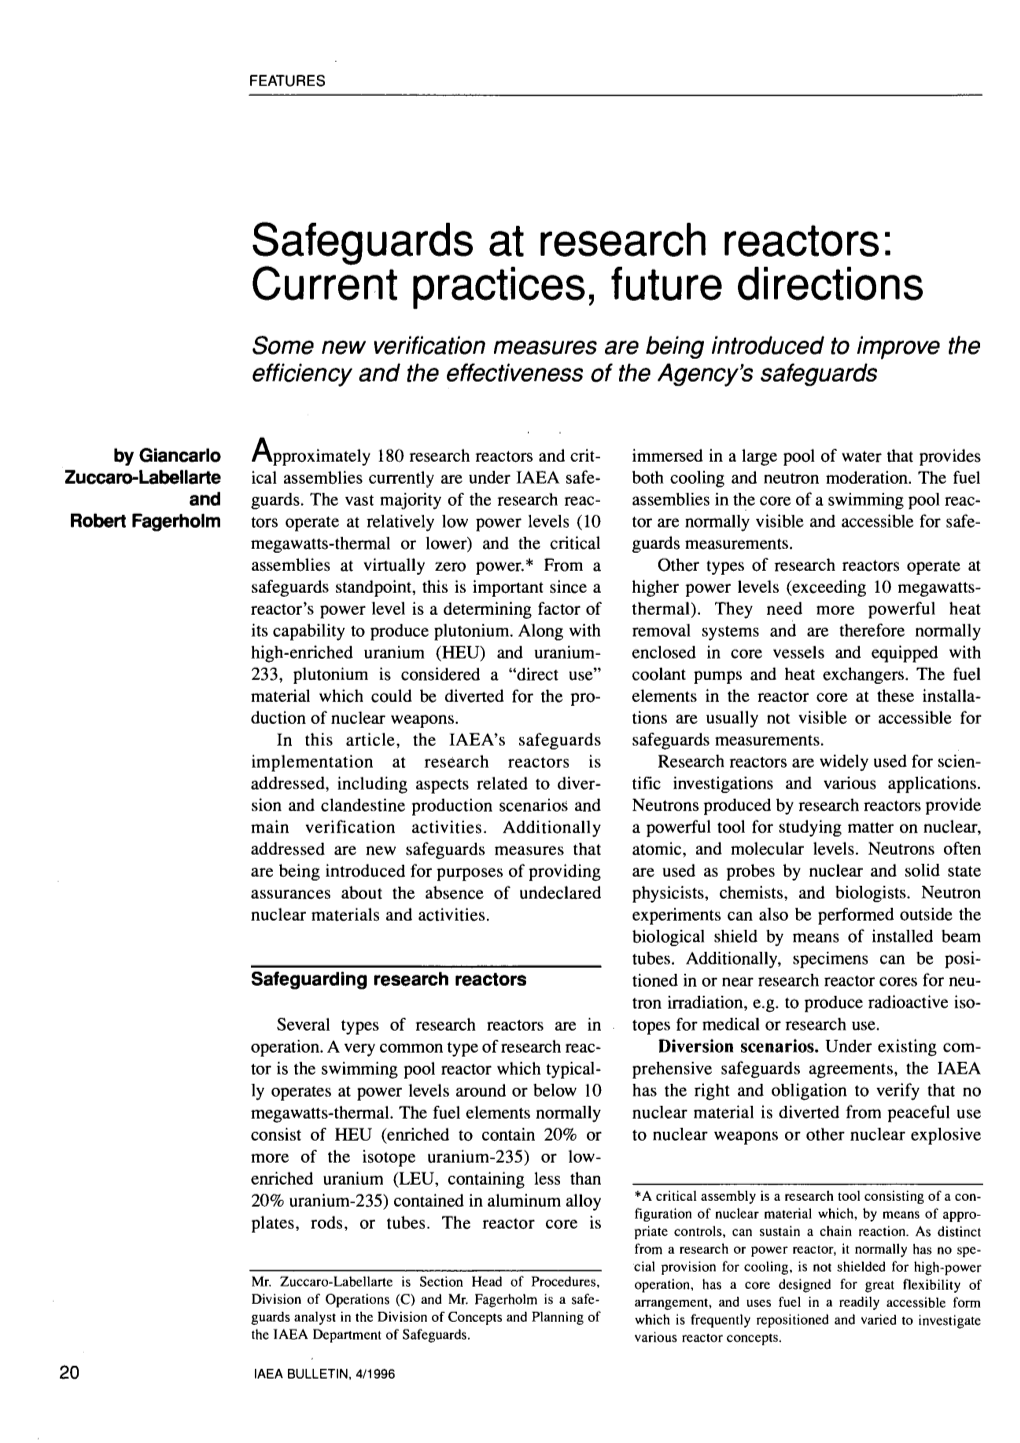 Safeguards at Research Reactors: Current Practices, Future Directions